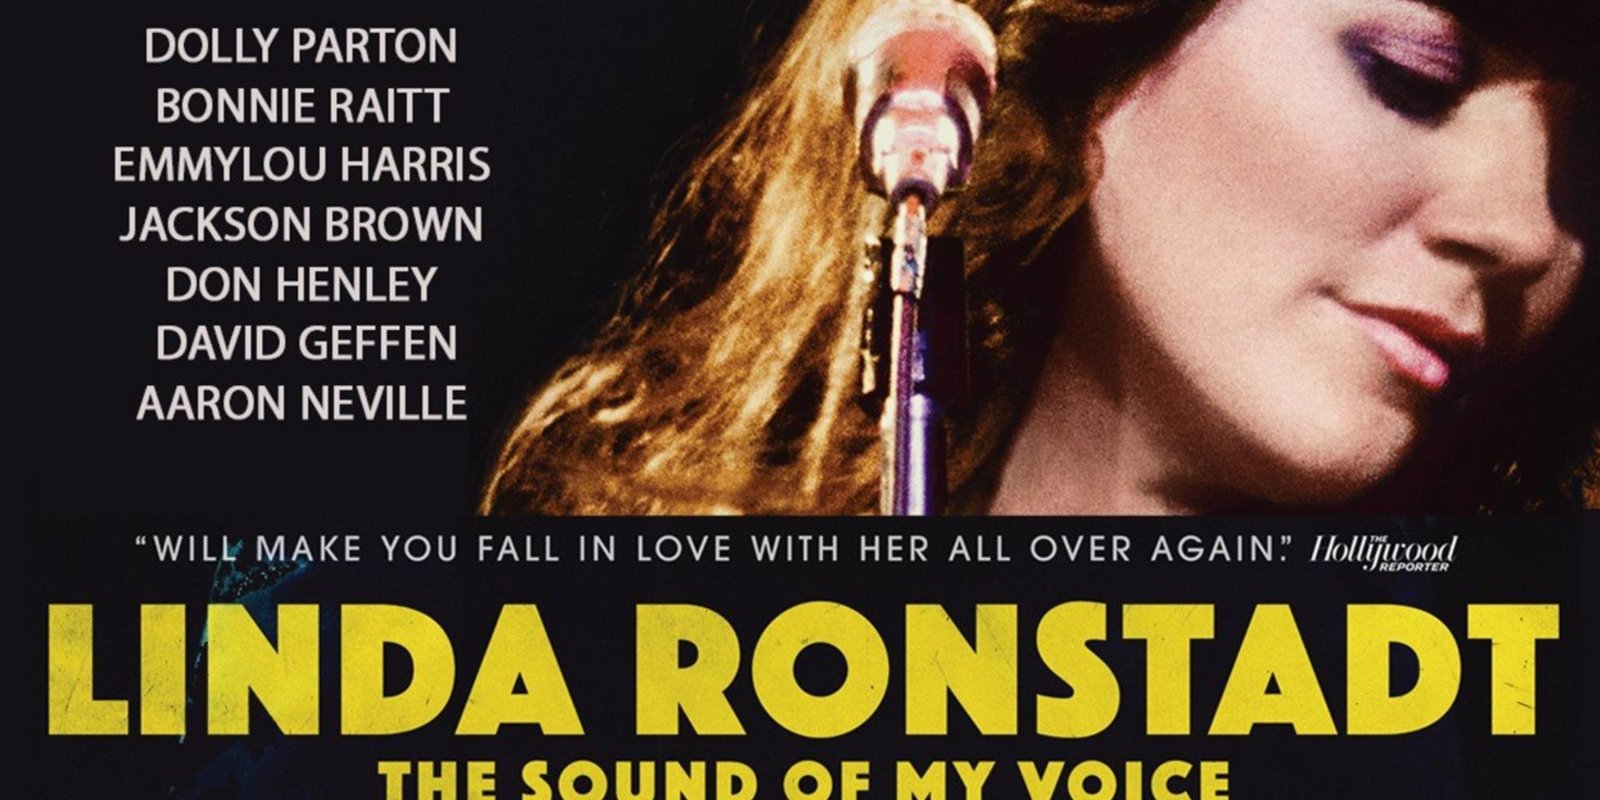 Promo image from Linda Ronstadt documentary